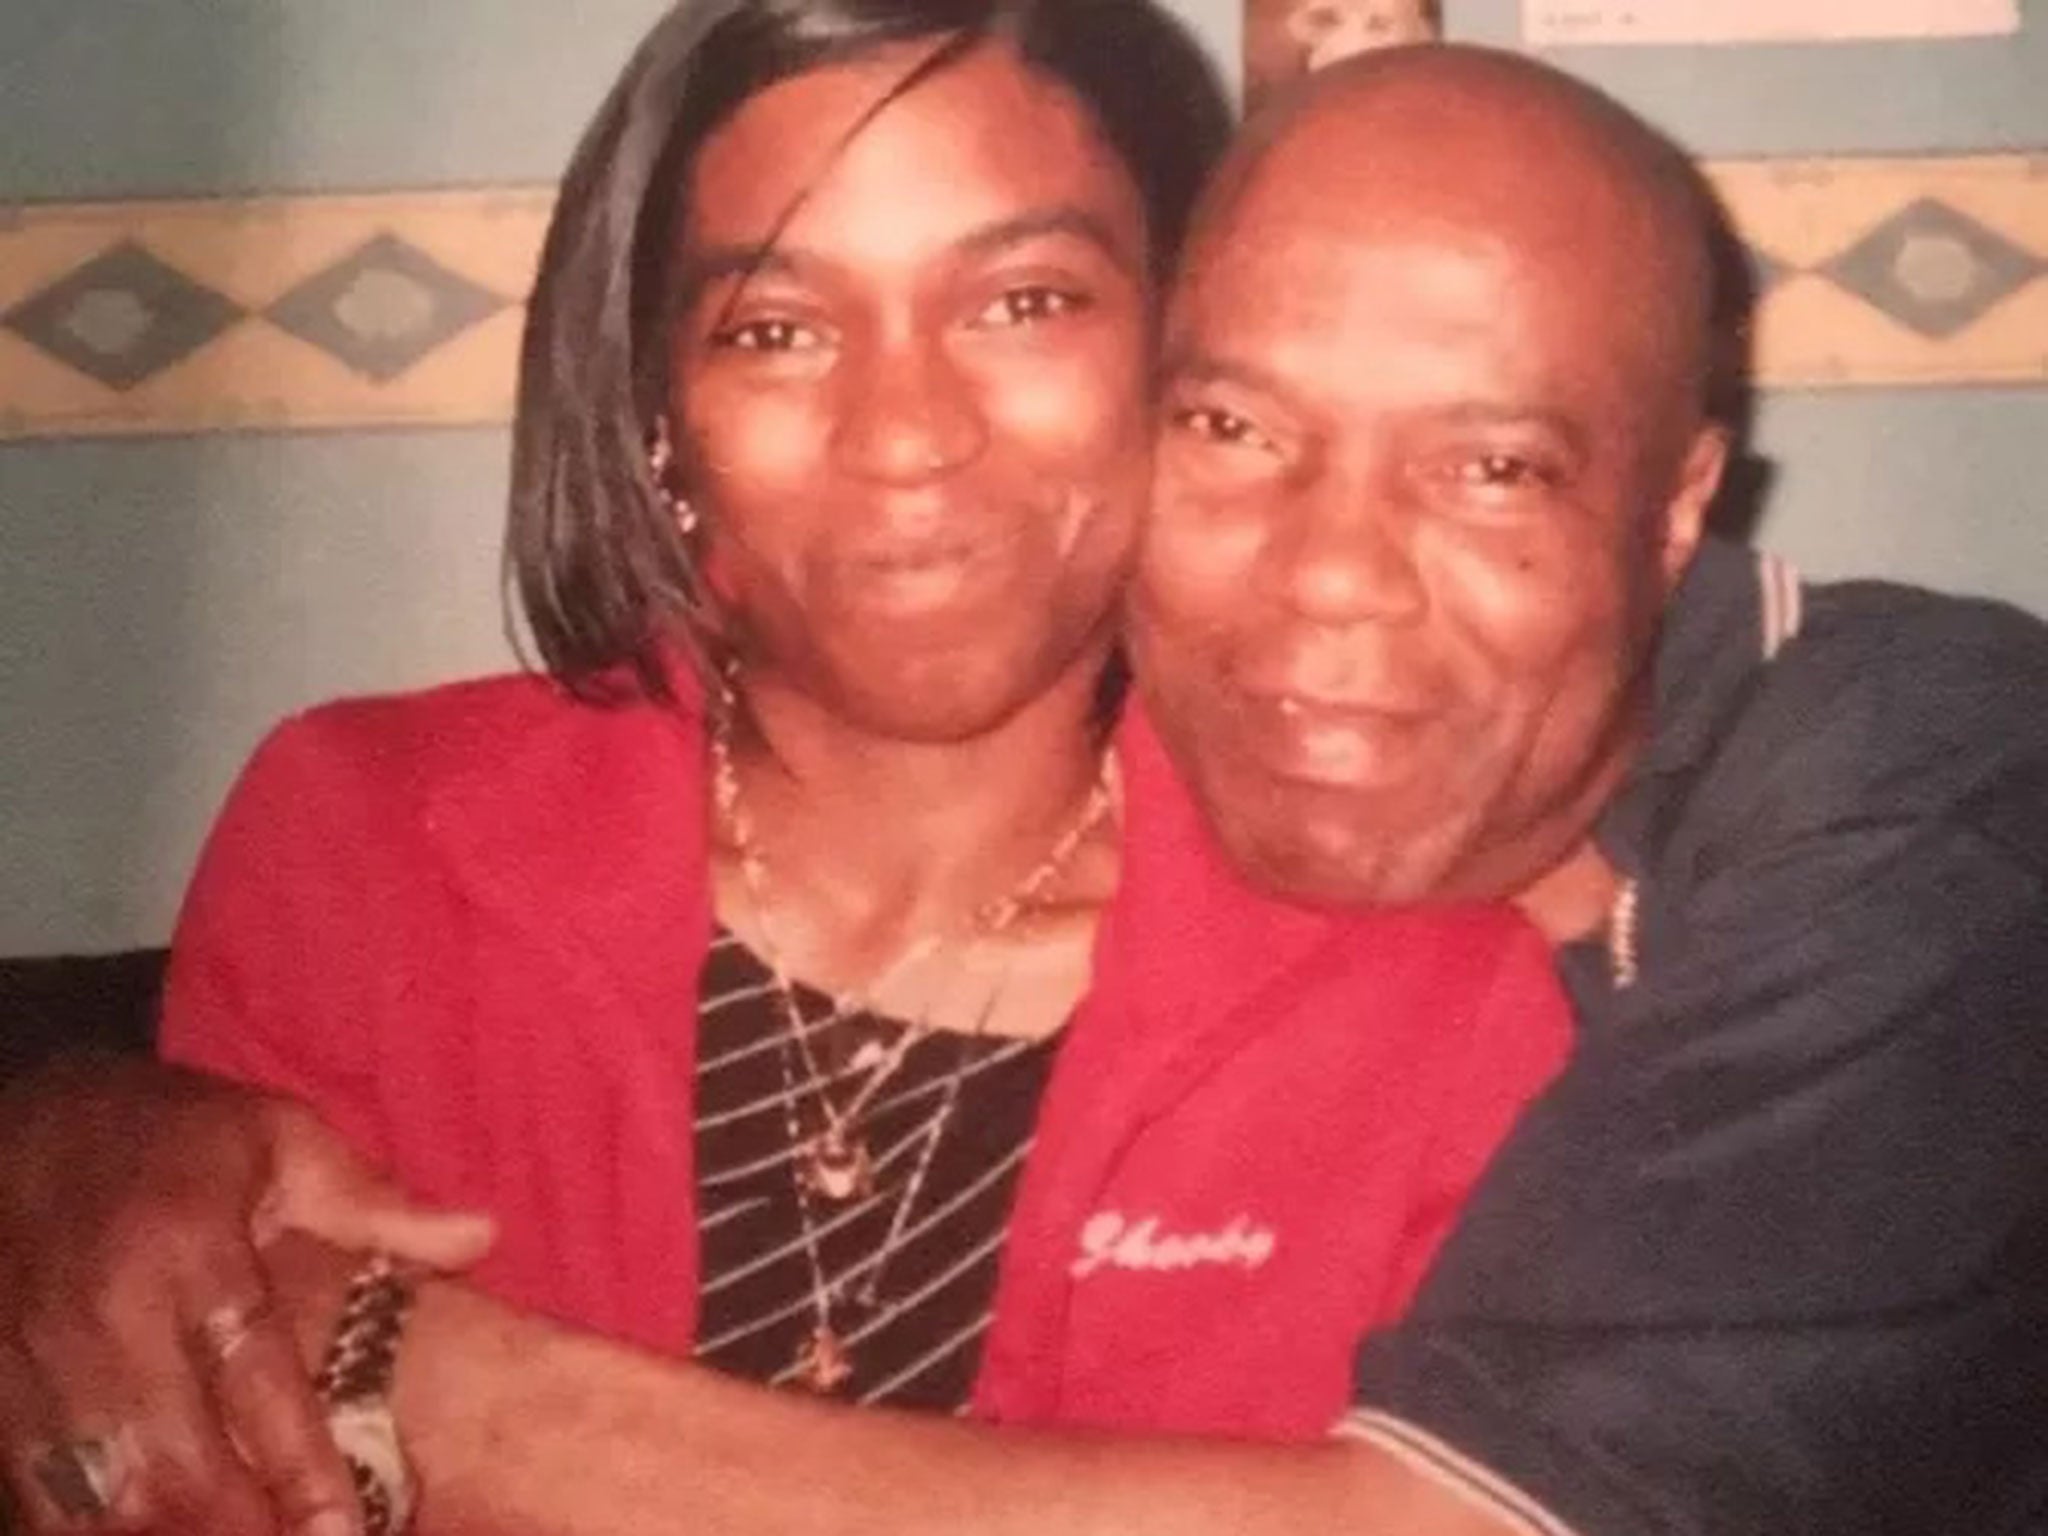 The bodies of Noel Brown, 69, and his daughter Marie Brown, 41, were found at a flat in Deptford on 4 December